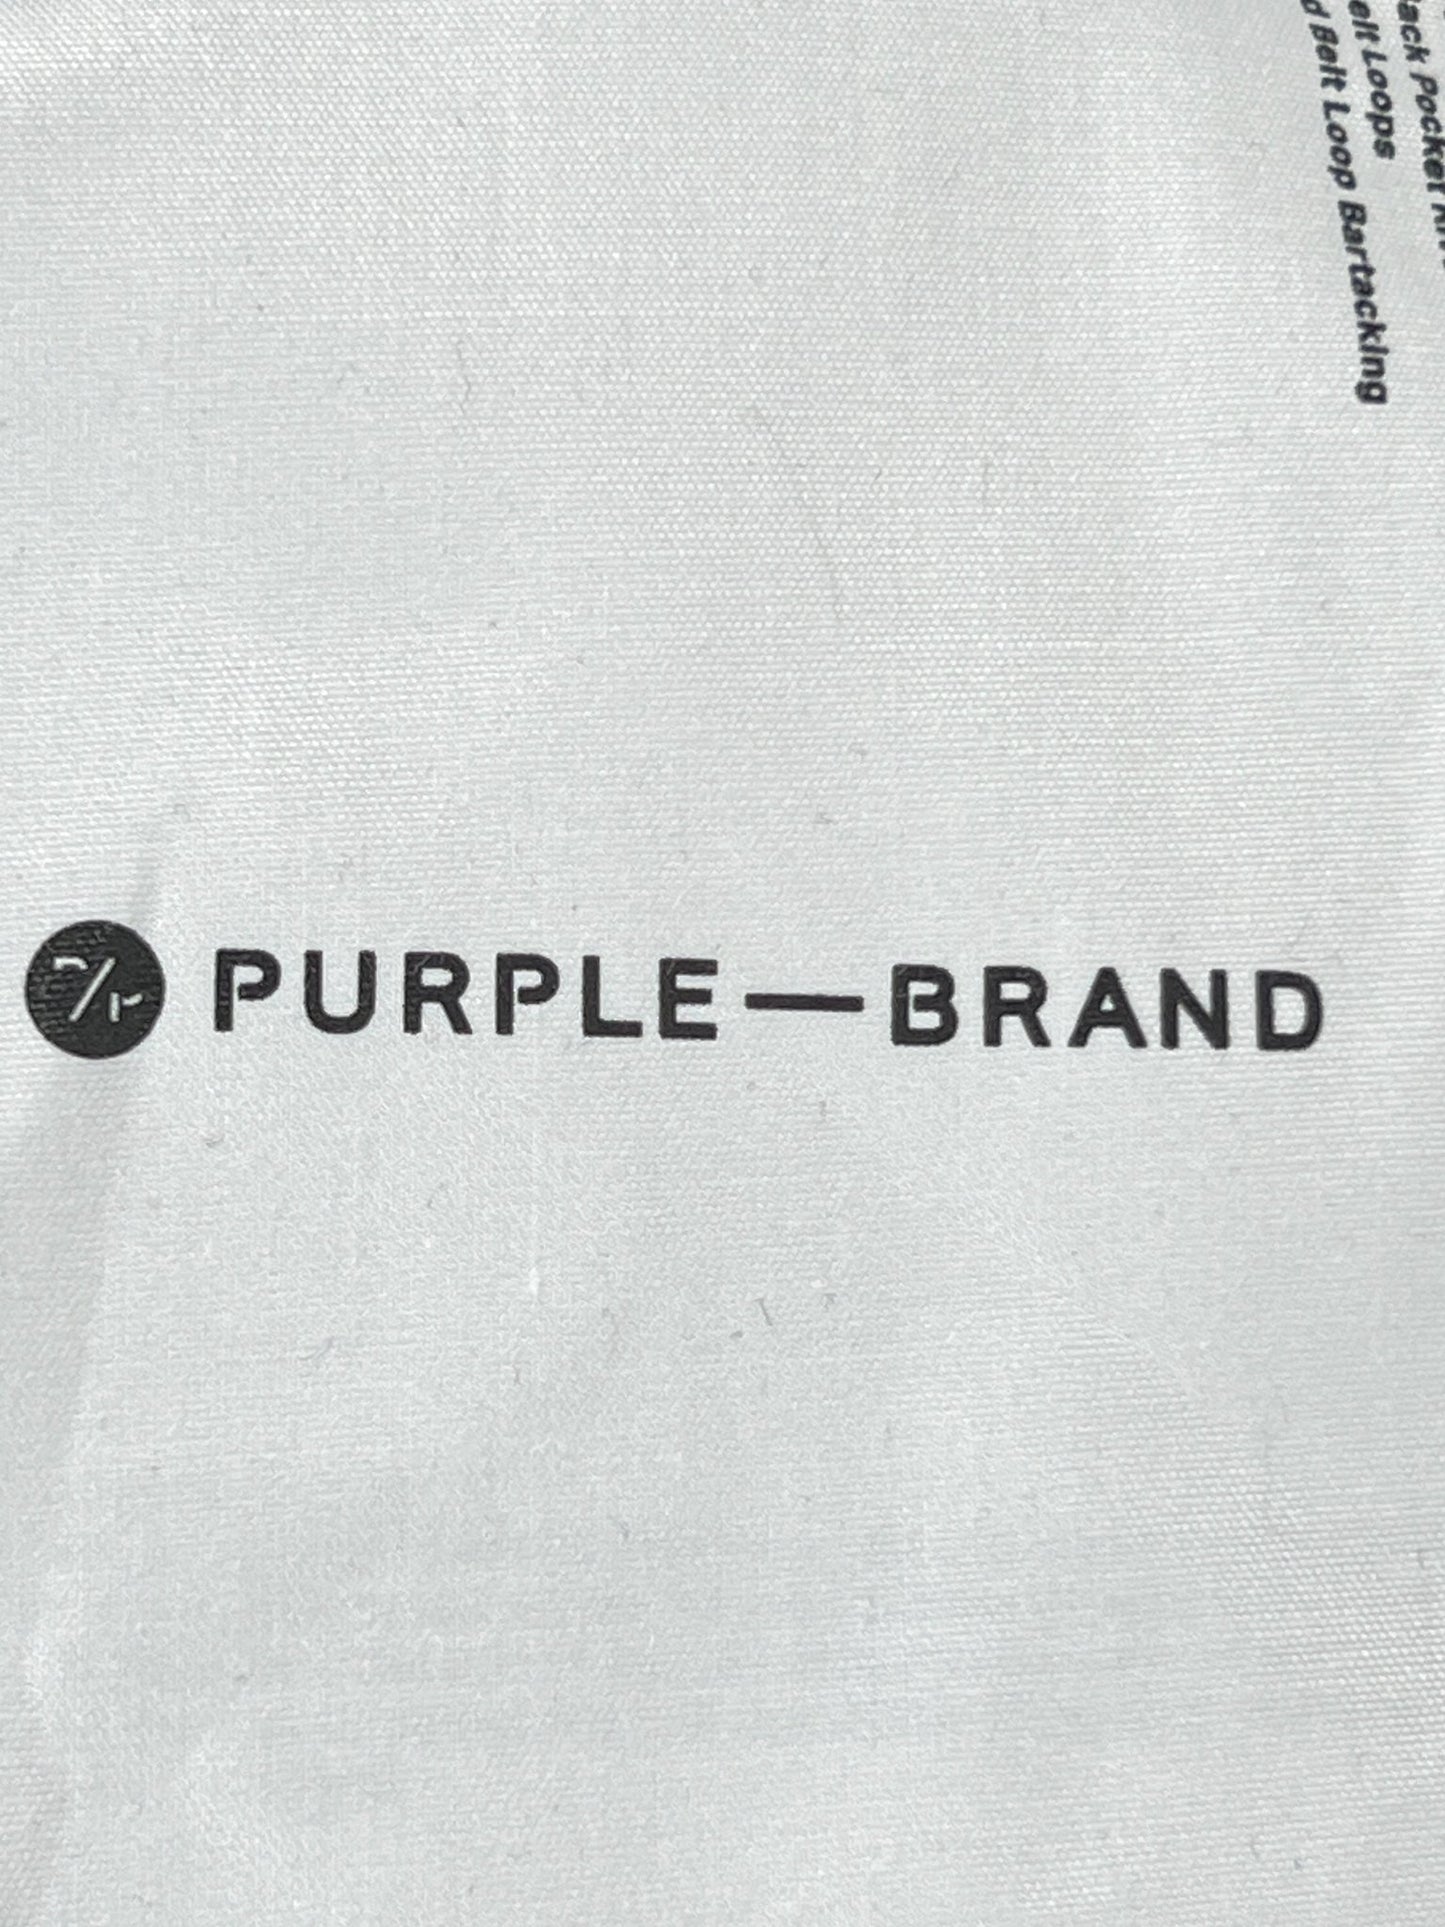 The PURPLE BRAND logo on a distressed white bag.